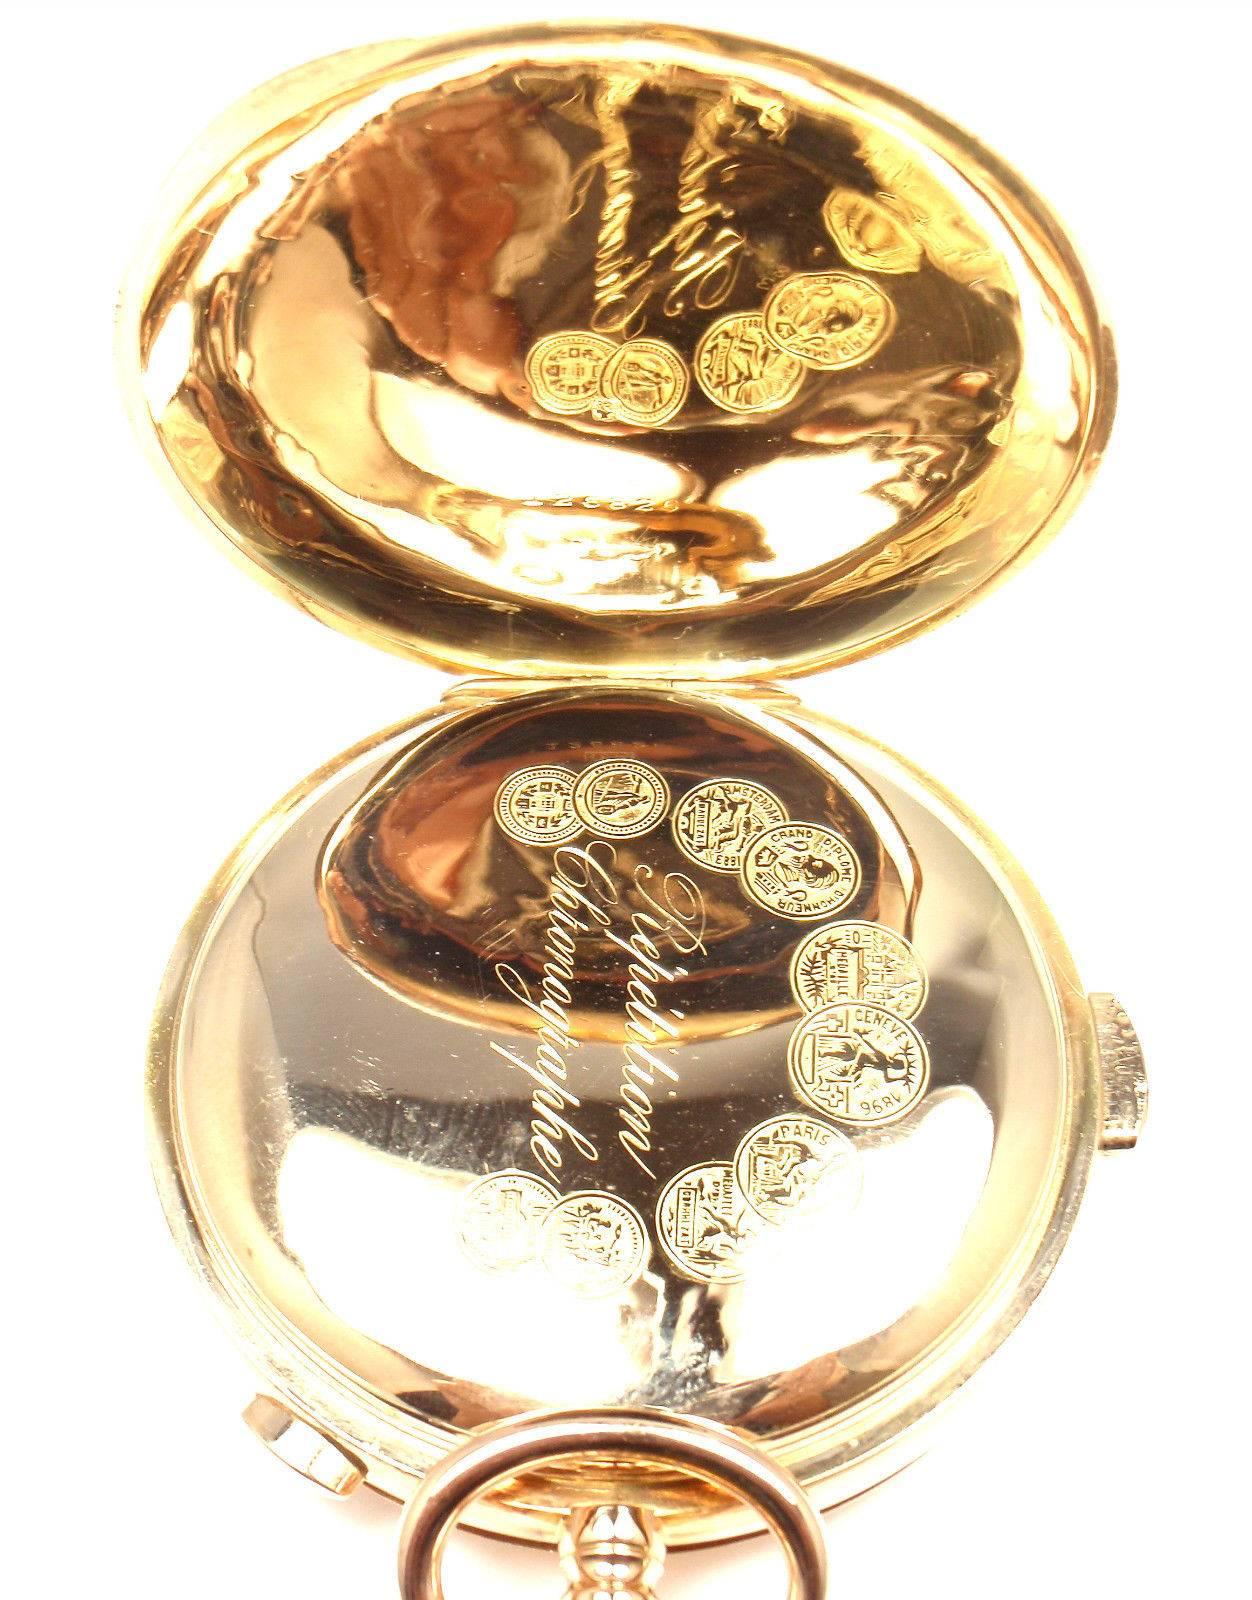 Rose Gold Hunting Cased Quarter Repeater Vintage Chronograph Pocket Watch 3